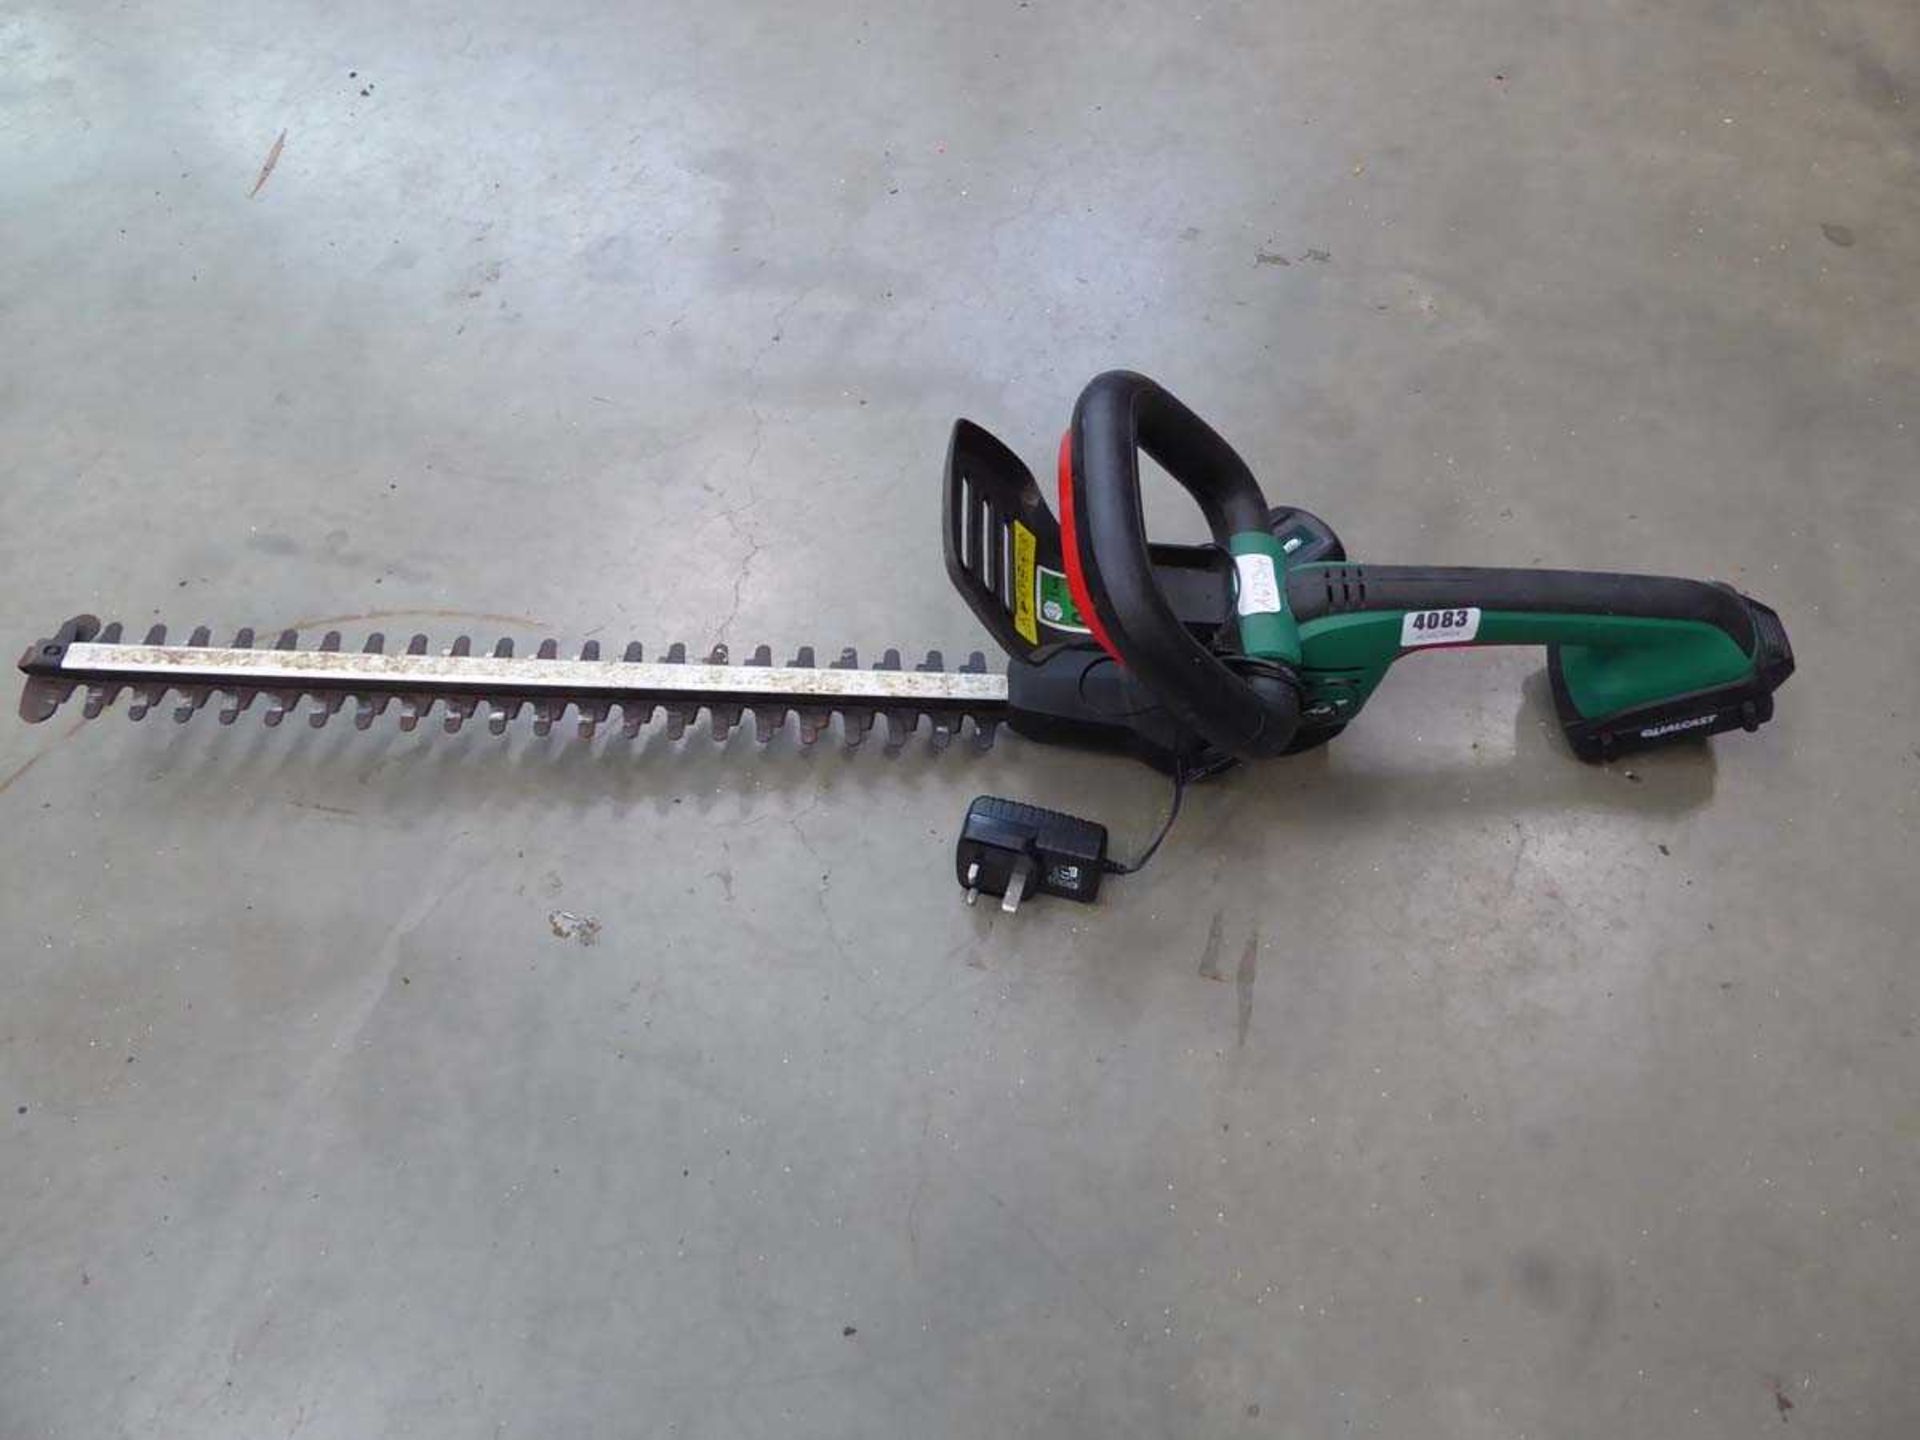 Qualcast battery powered hedge cutter with battery and charger